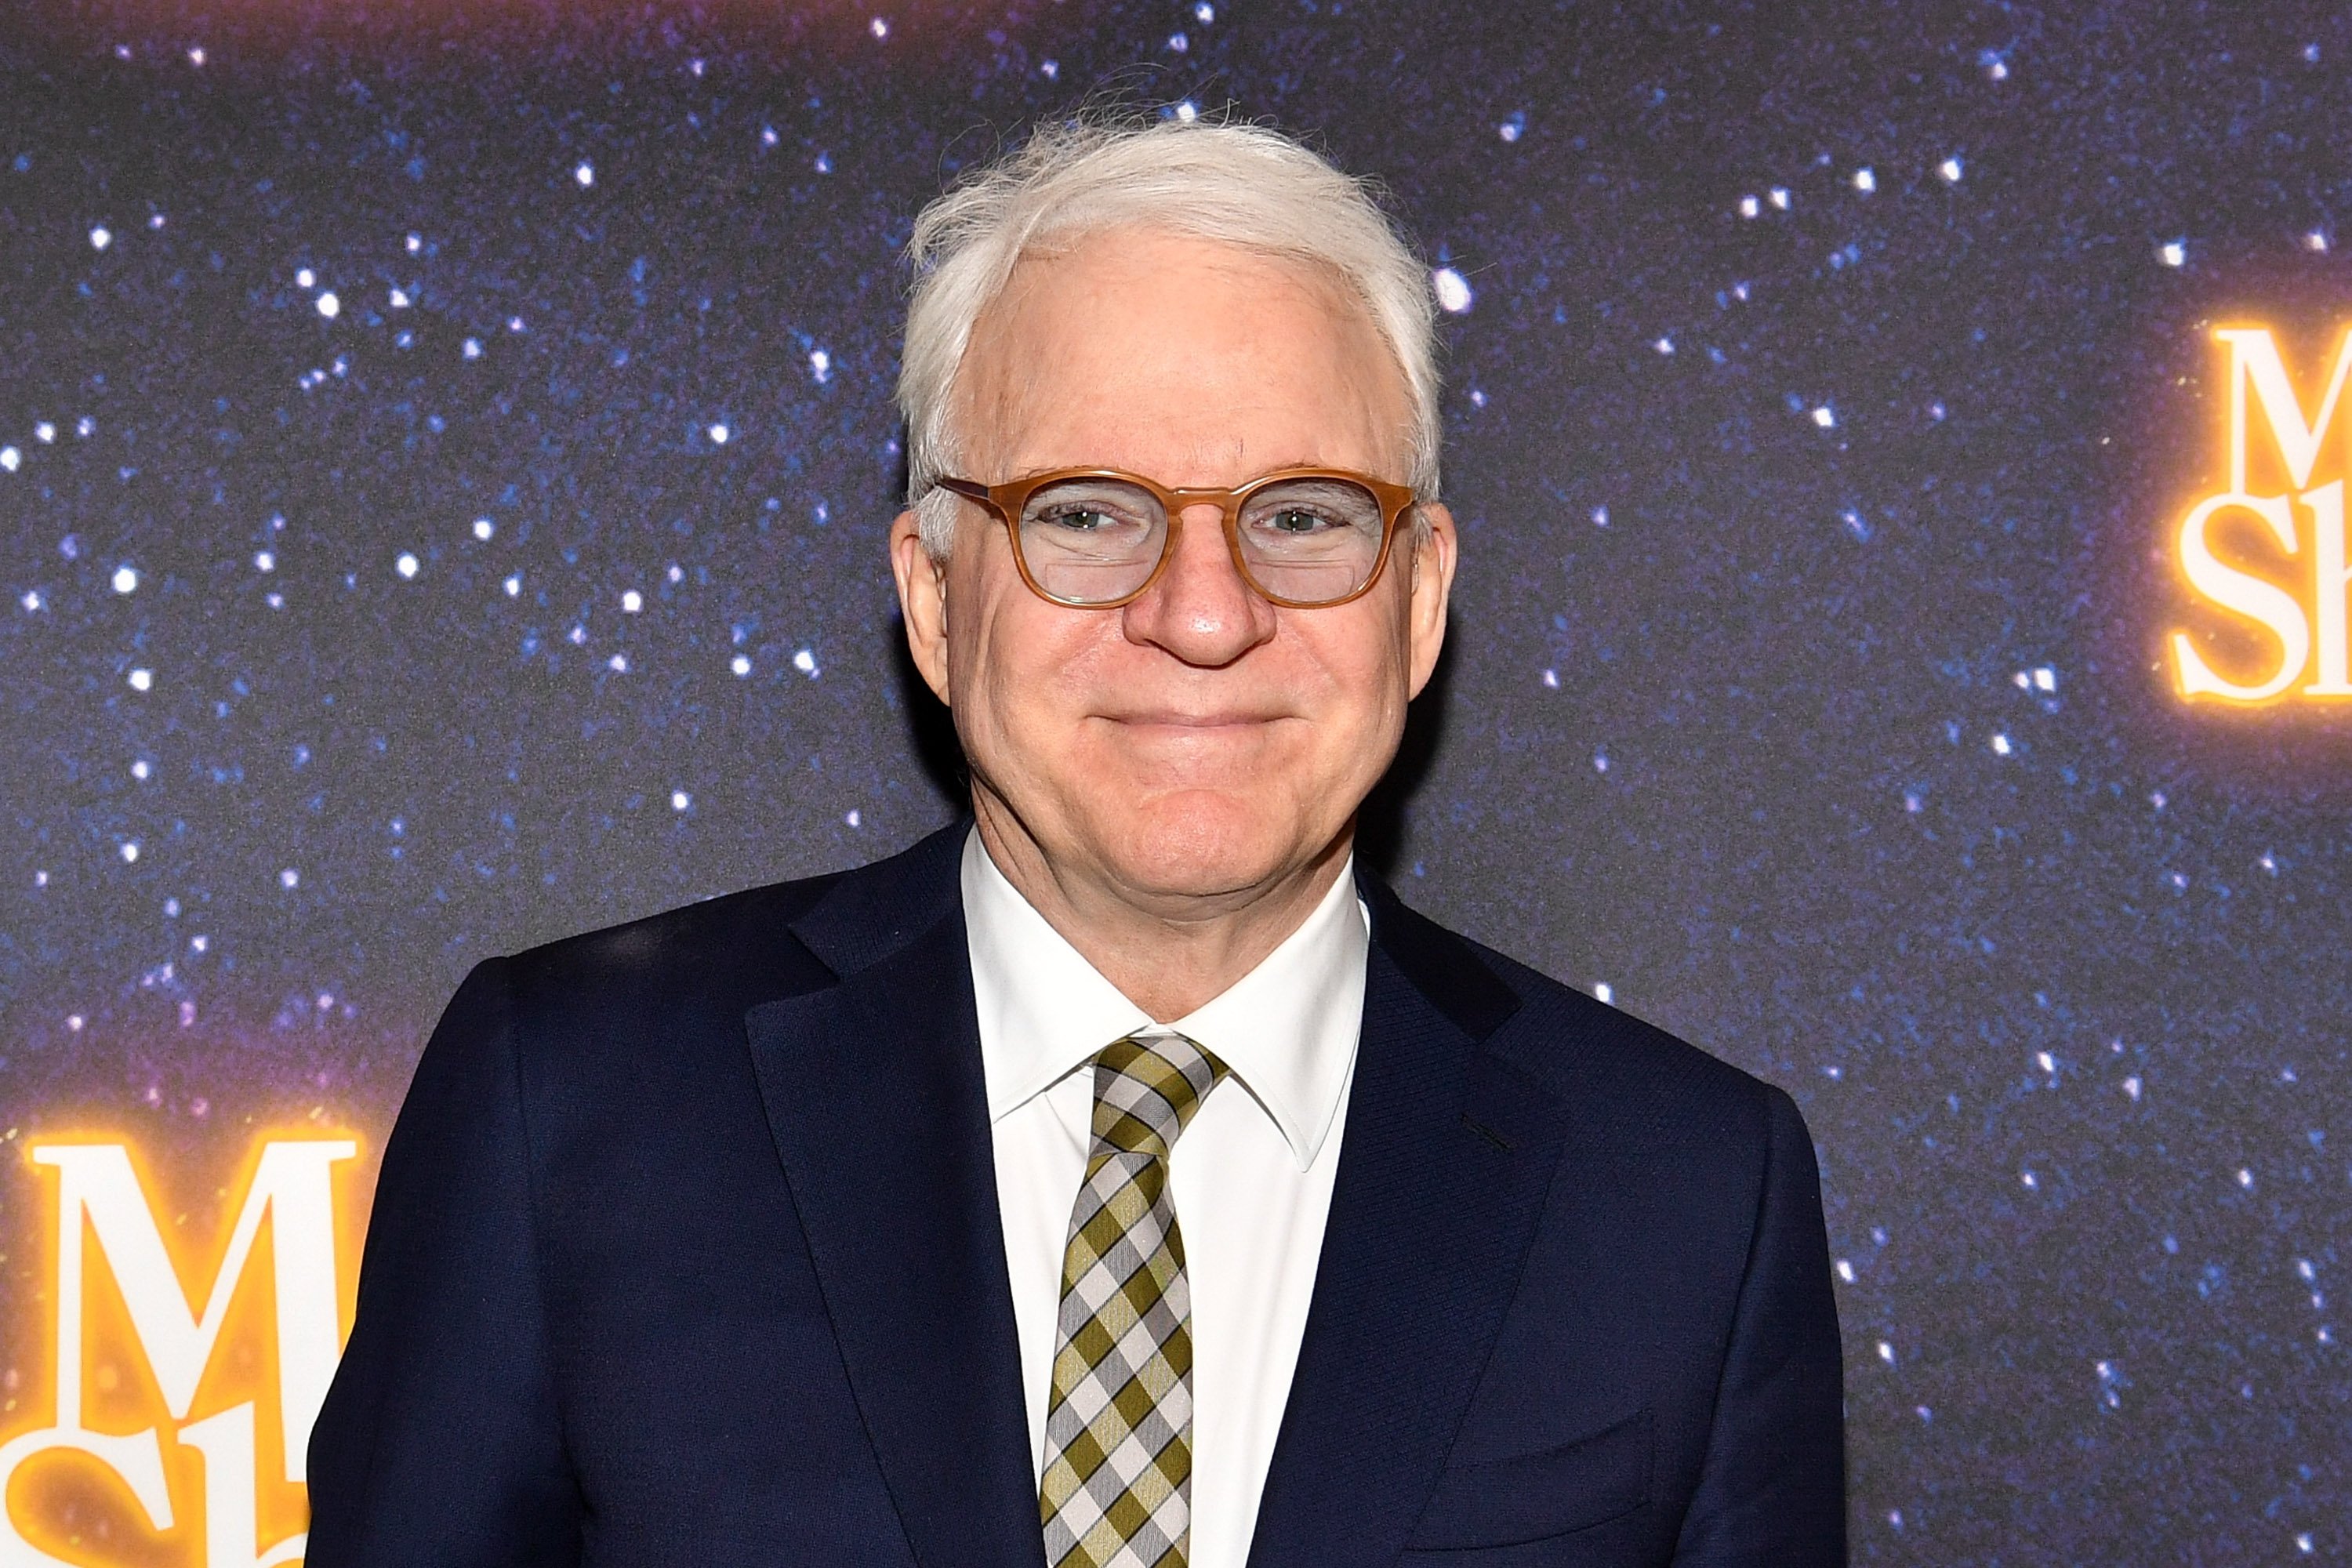 Steve martin pictured at the "Meteor Shower" Broadway Opening Night at the Booth Theatre, November 2017 in New York City. | Photo: Getty Images